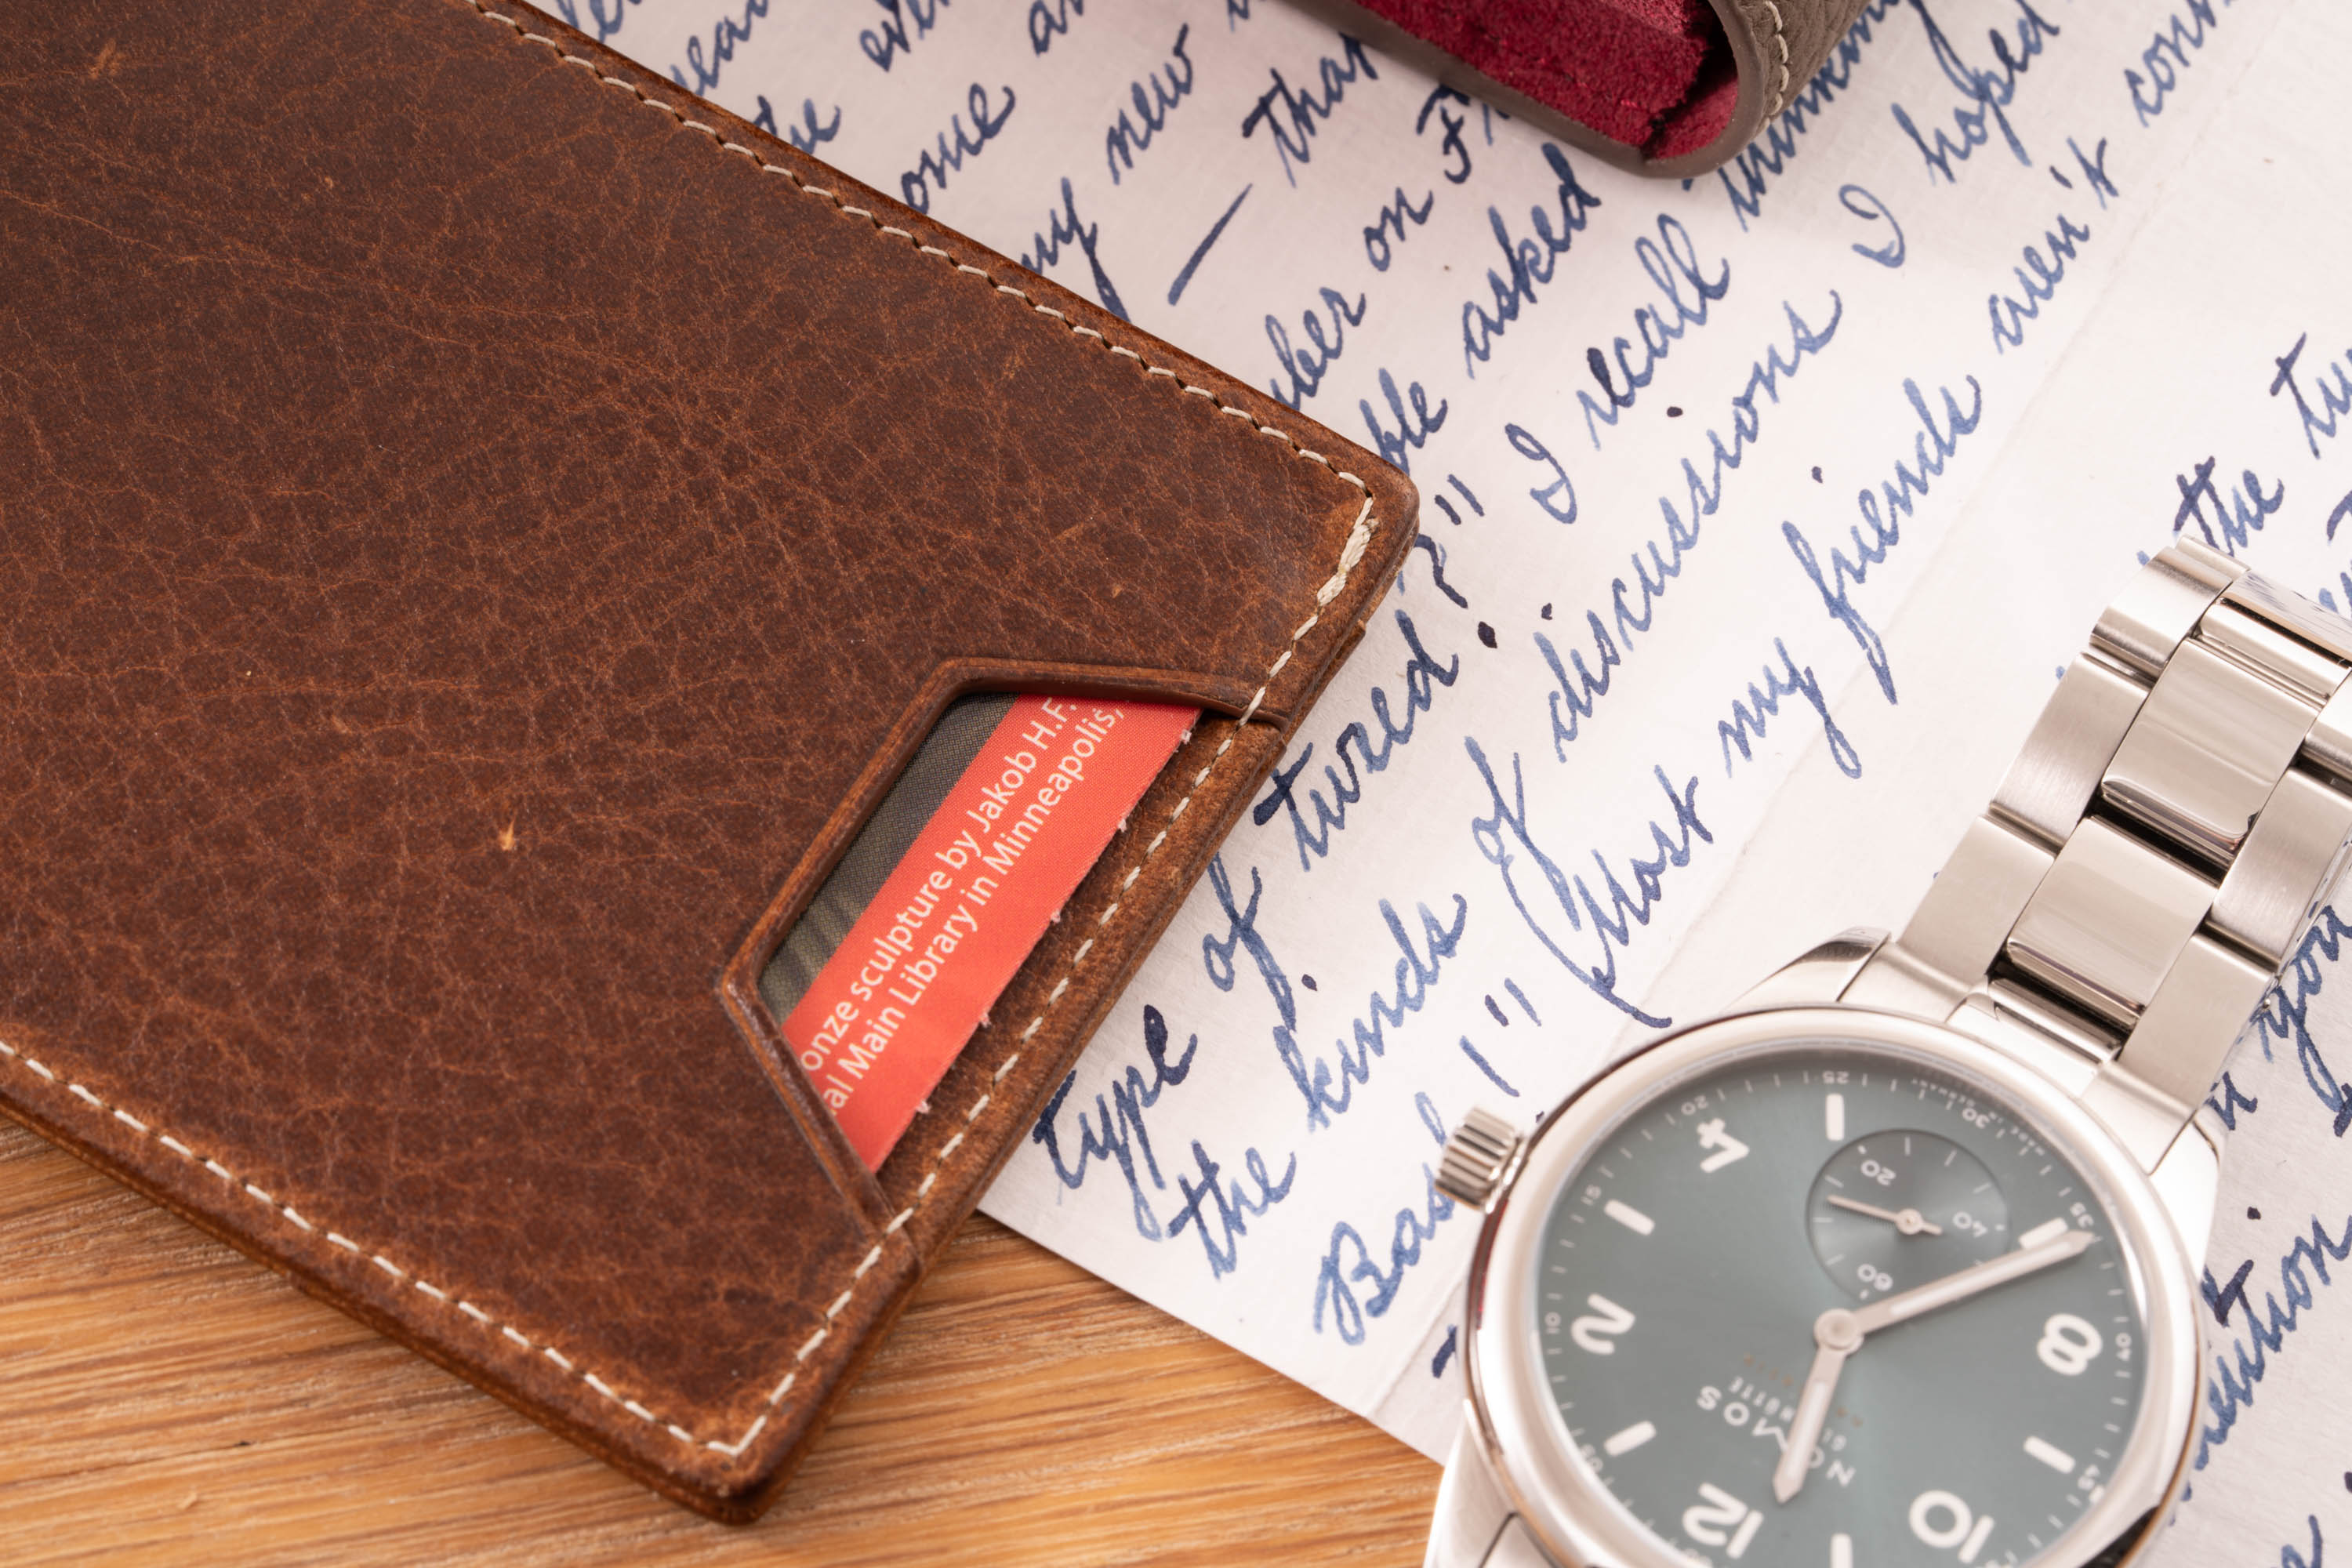 Slim Wallet - 4CC - Dumont Saddle Brown Full-Grain Leather becomes more beautiful with age. 